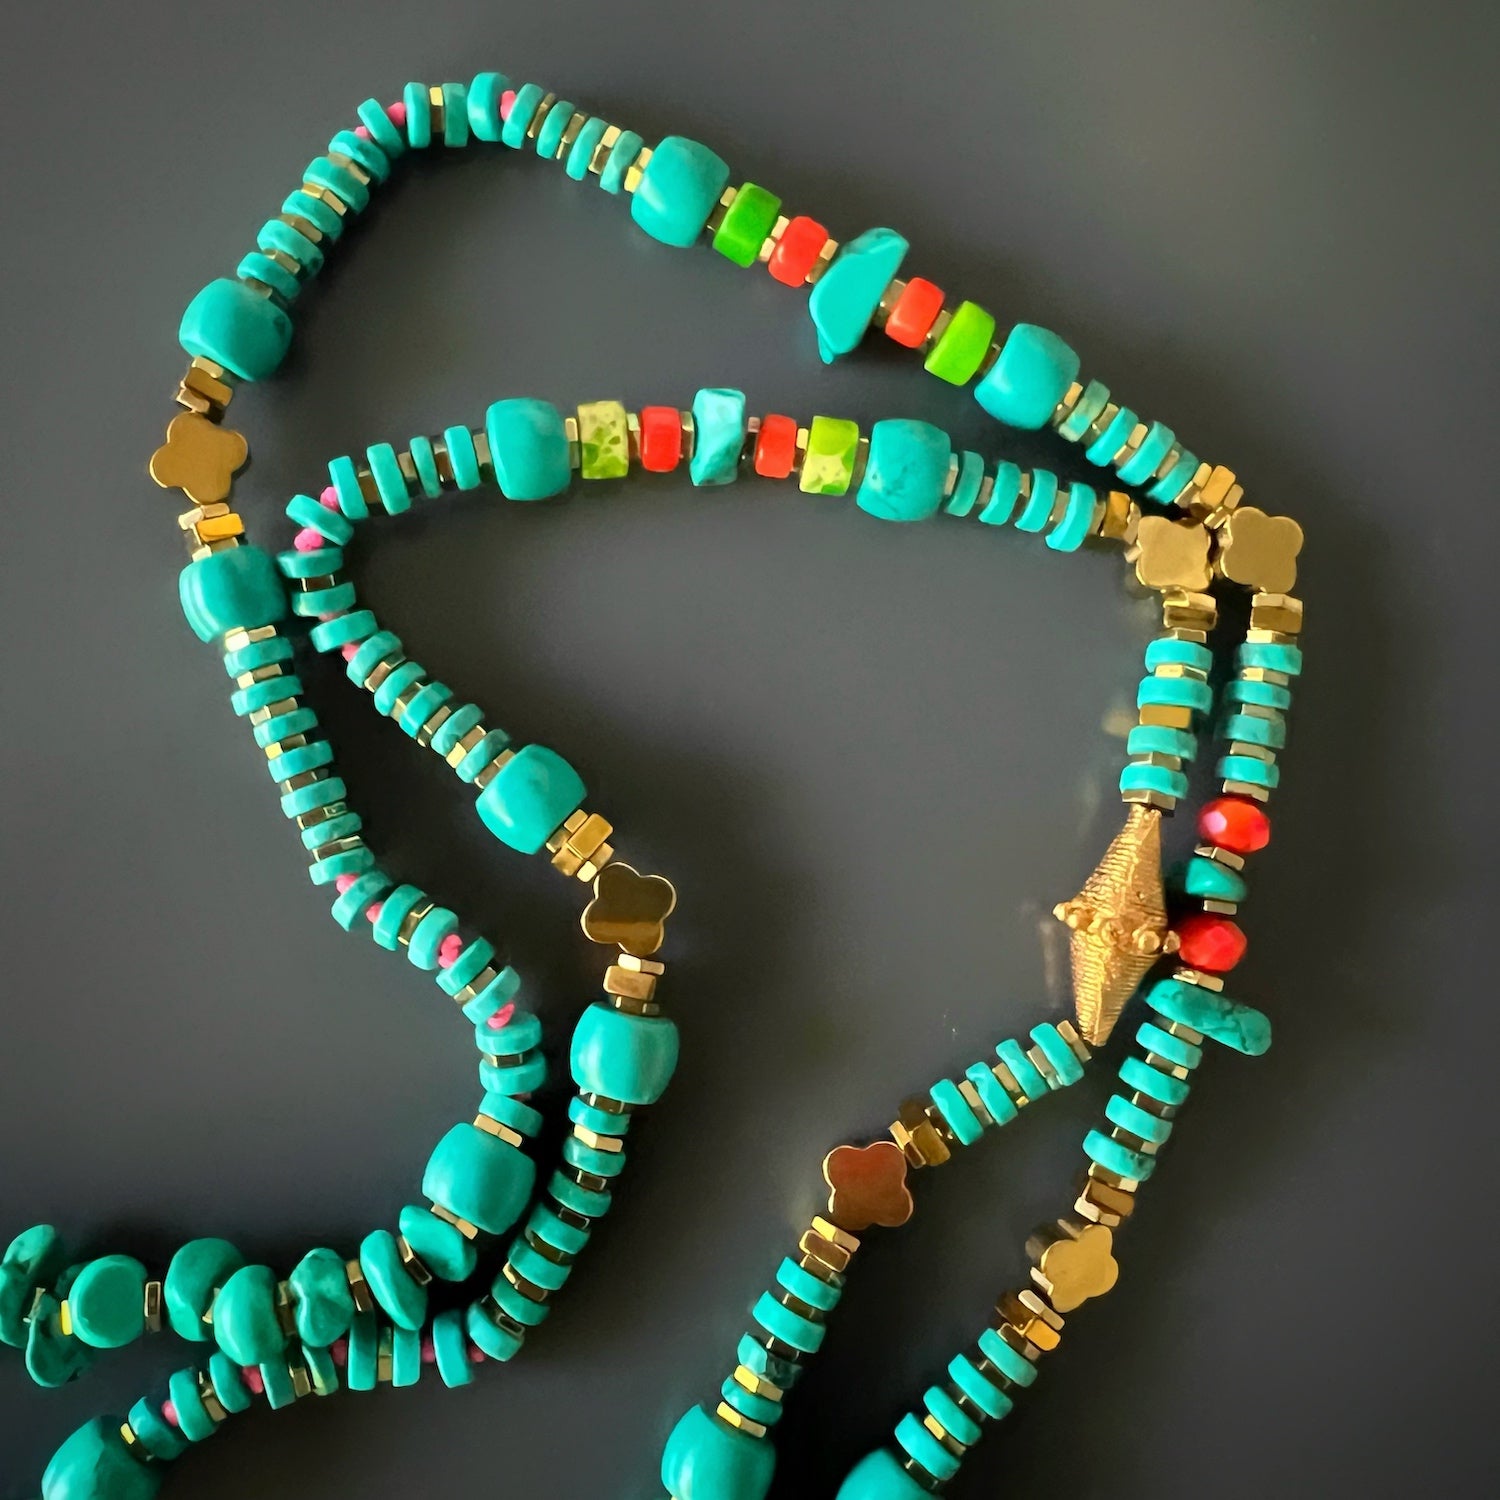 The turquoise and hematite beads representing spiritual and protective elements on the necklace